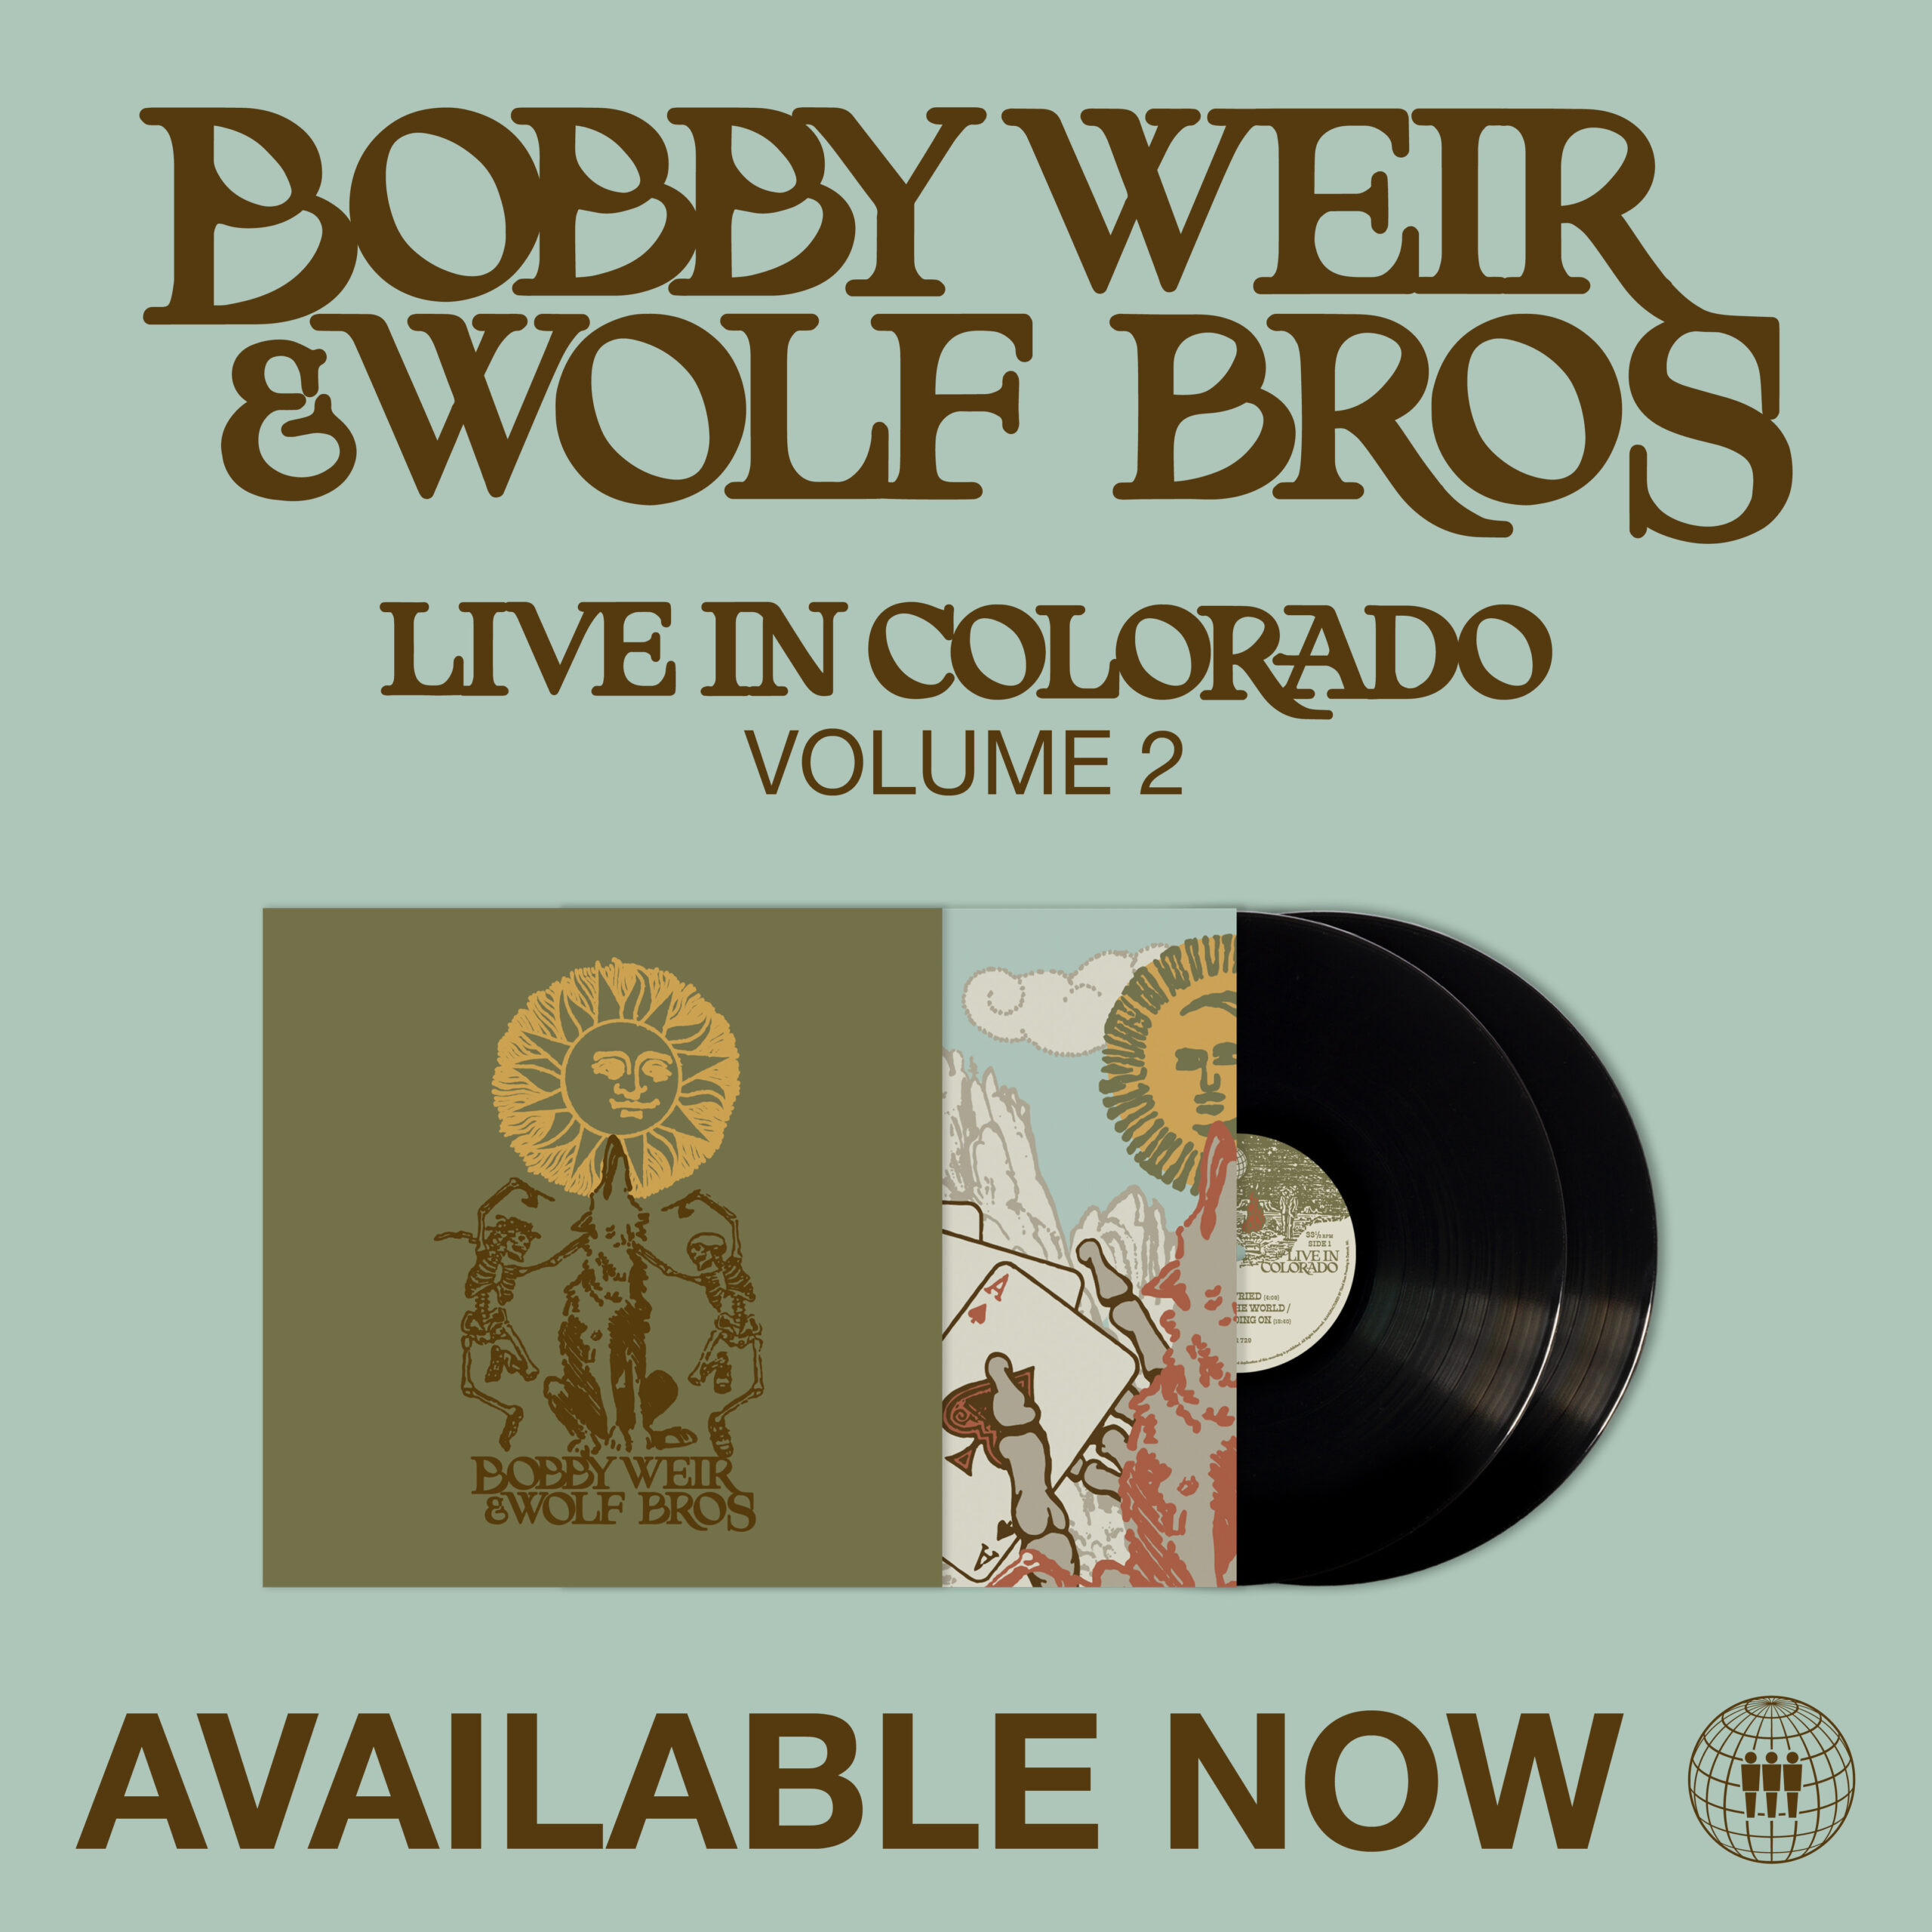 Bobby Weir & Wolf Bros: Live in Colorado, Vol 2. Out Now on Third Man Records